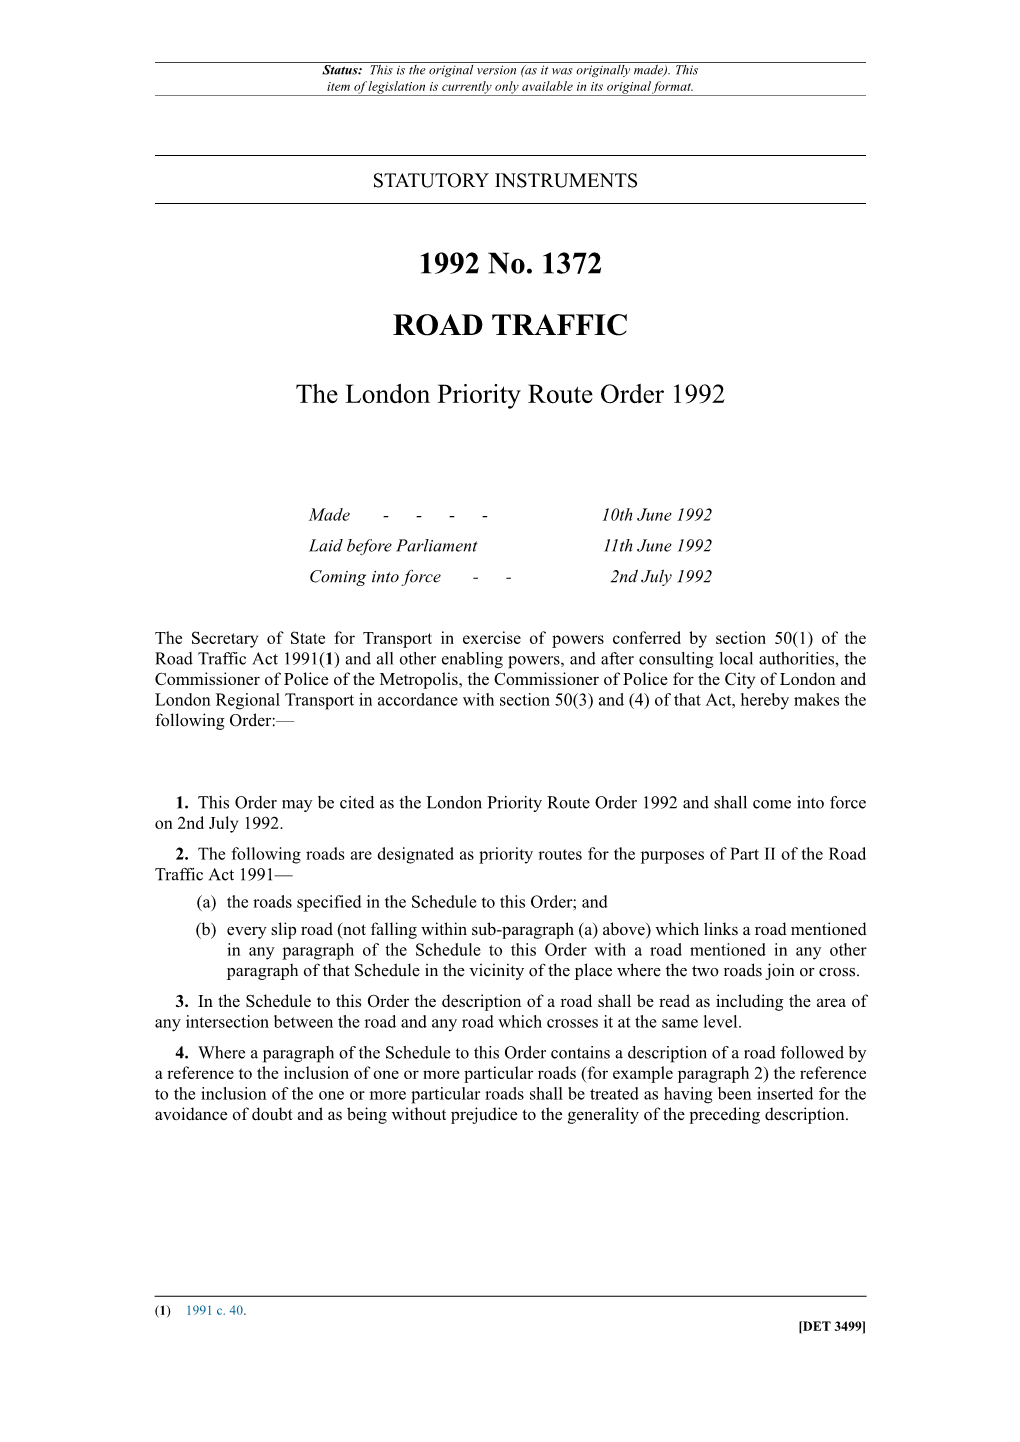 The London Priority Route Order 1992